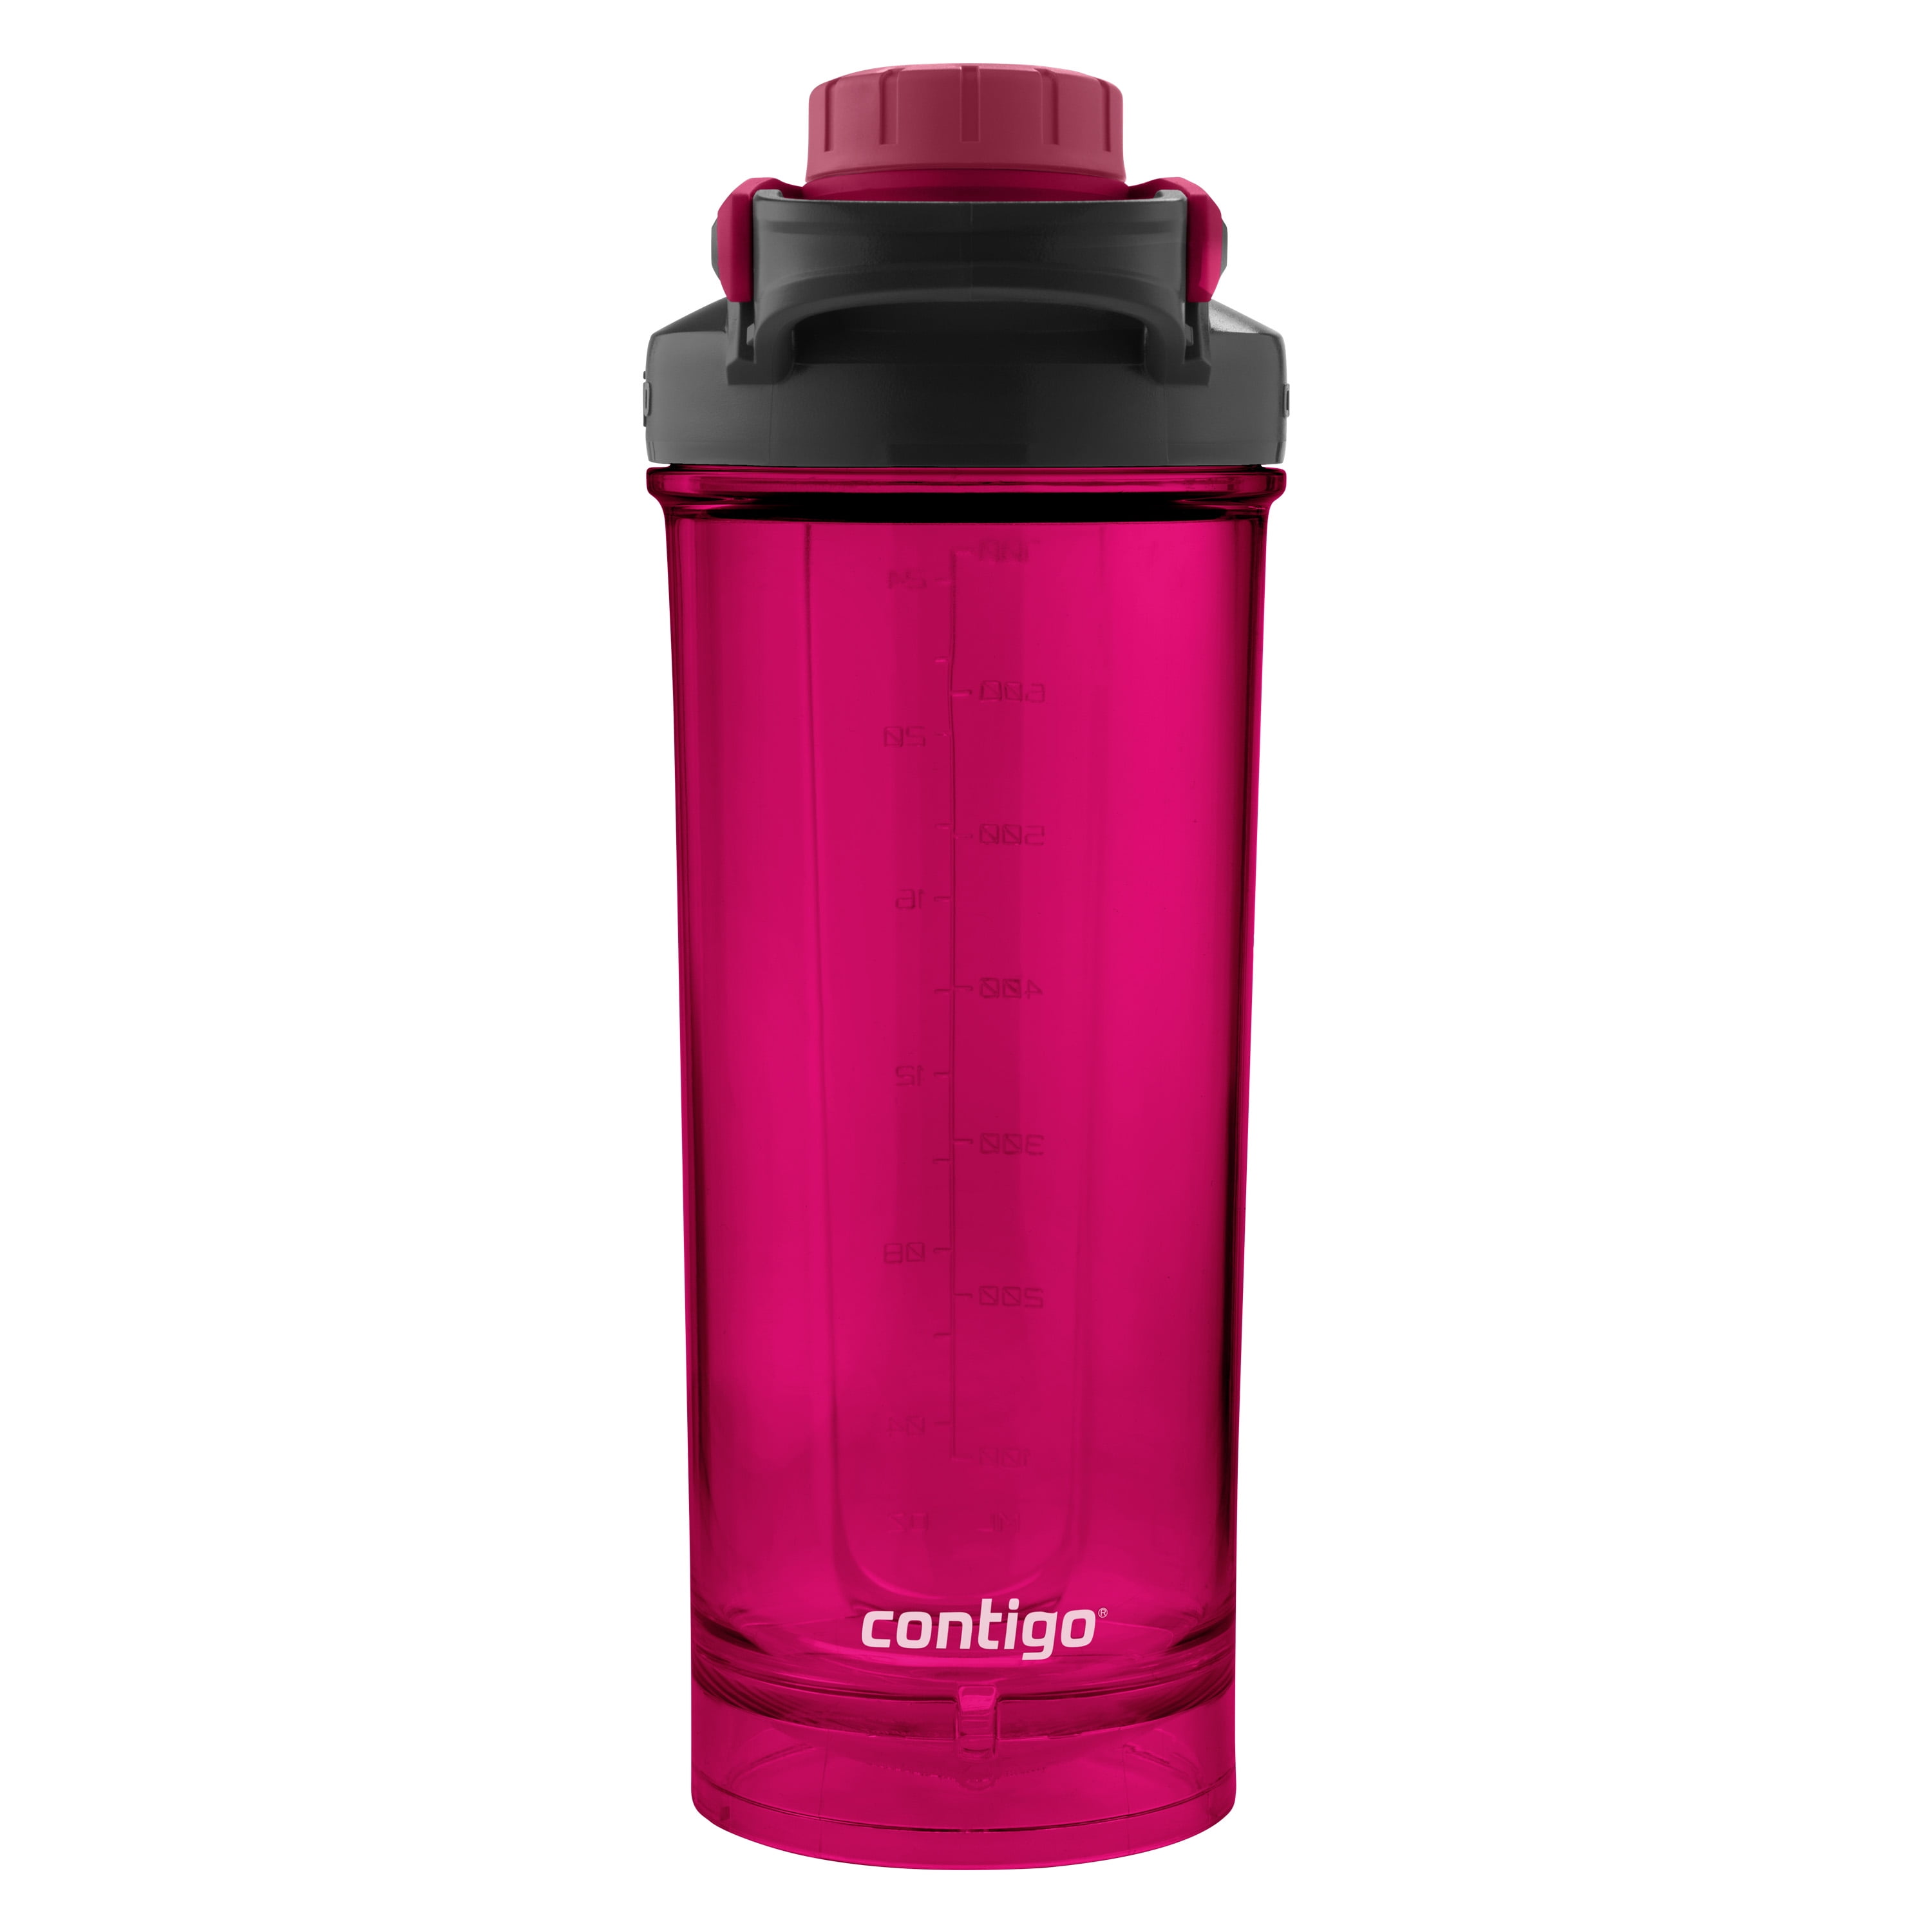 Contigo Shake and Go Fit 22-Oz. Mixer Bottle with Protein Compartment  Carolina Blue 72868 - Best Buy